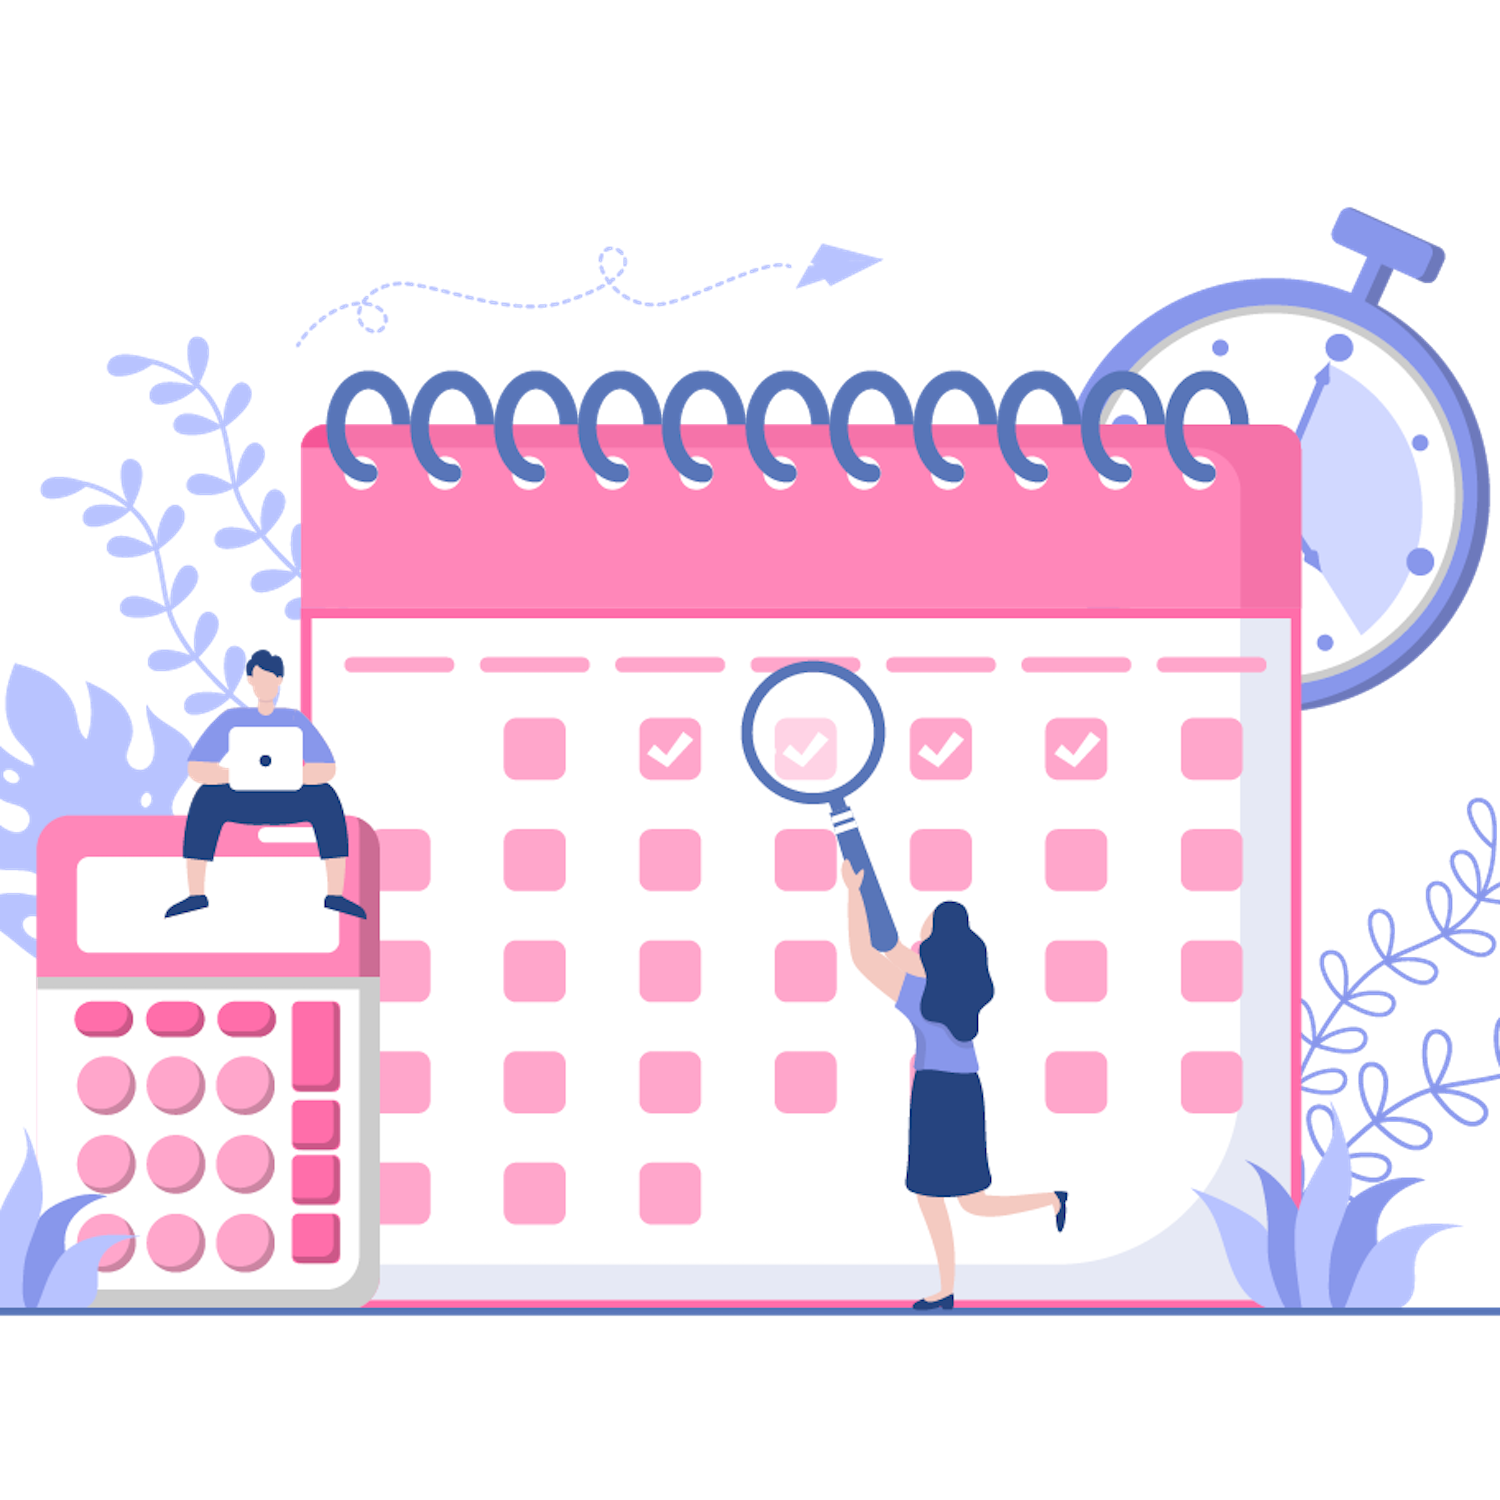 18 Planning Schedule or Time Management Calendar Illustrations preview image.